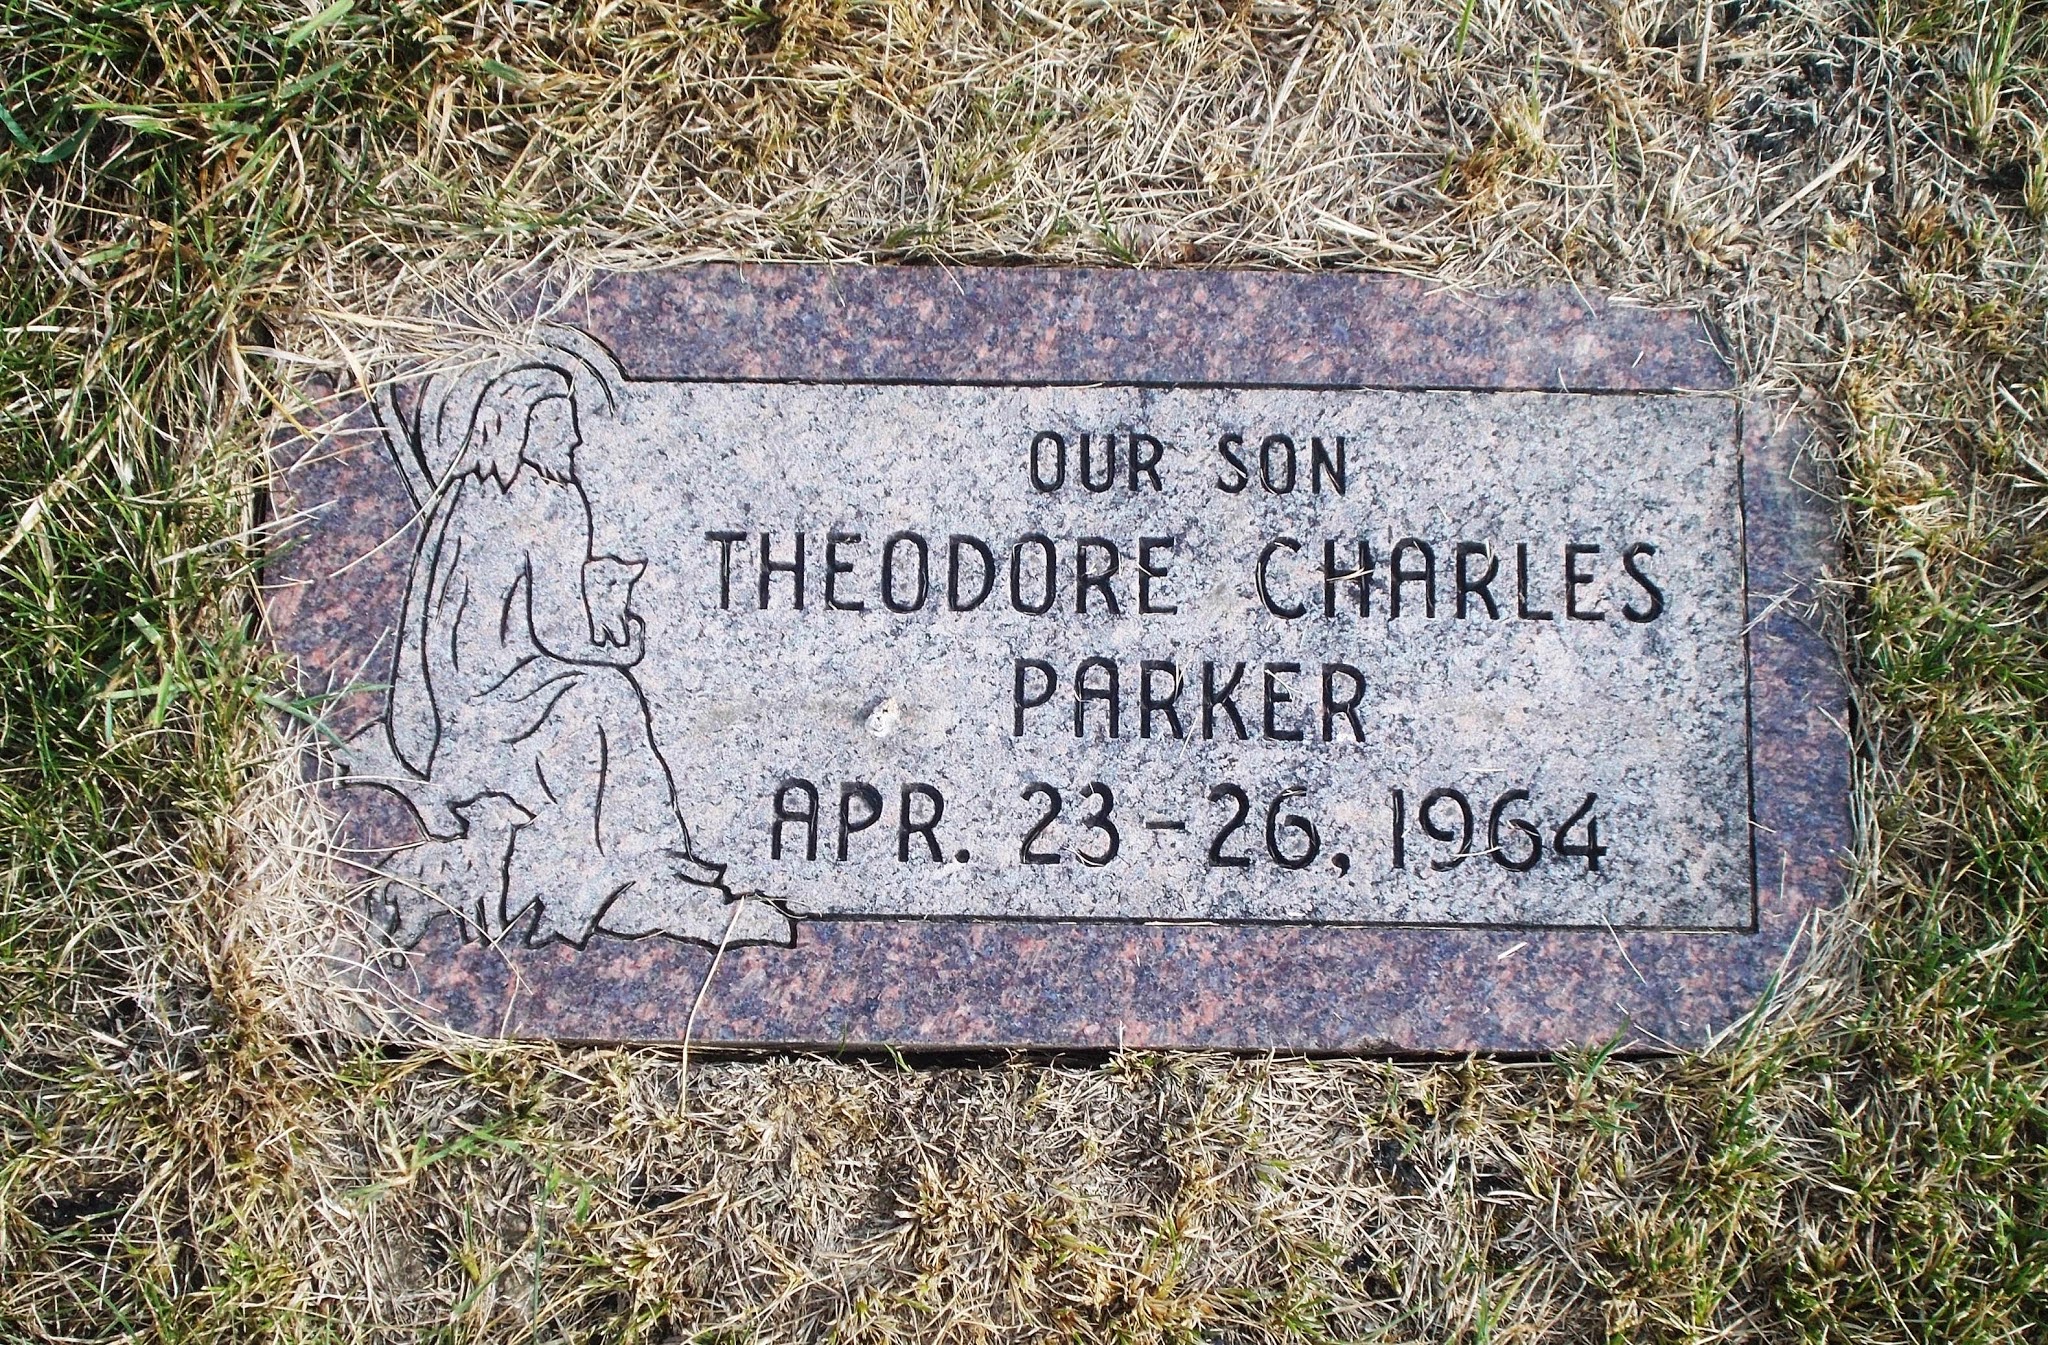 Theodore Charles Parker